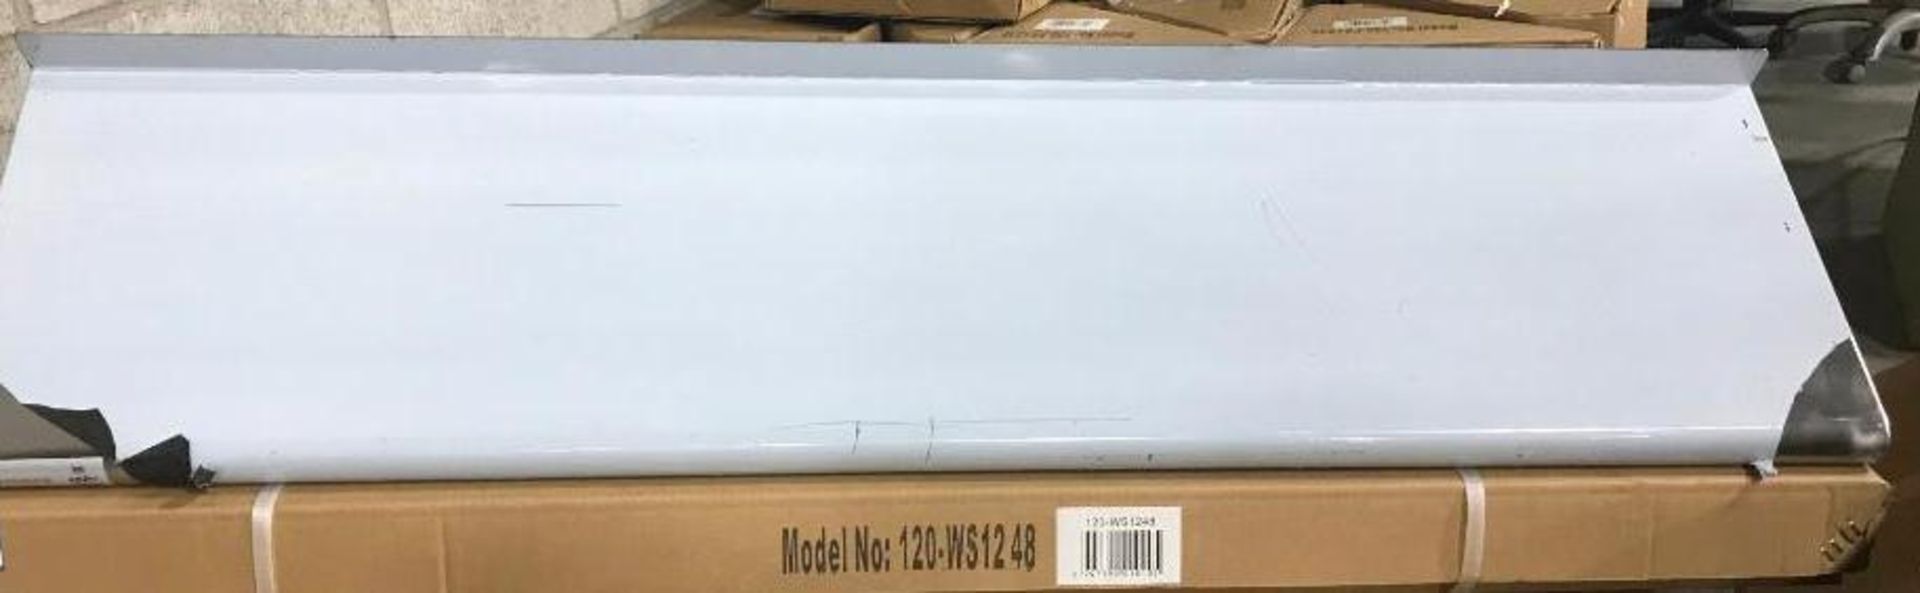 WALL MOUNT S/S SHELF 12"X48", 120-WS1248 - NEW IN BOX - Image 2 of 3